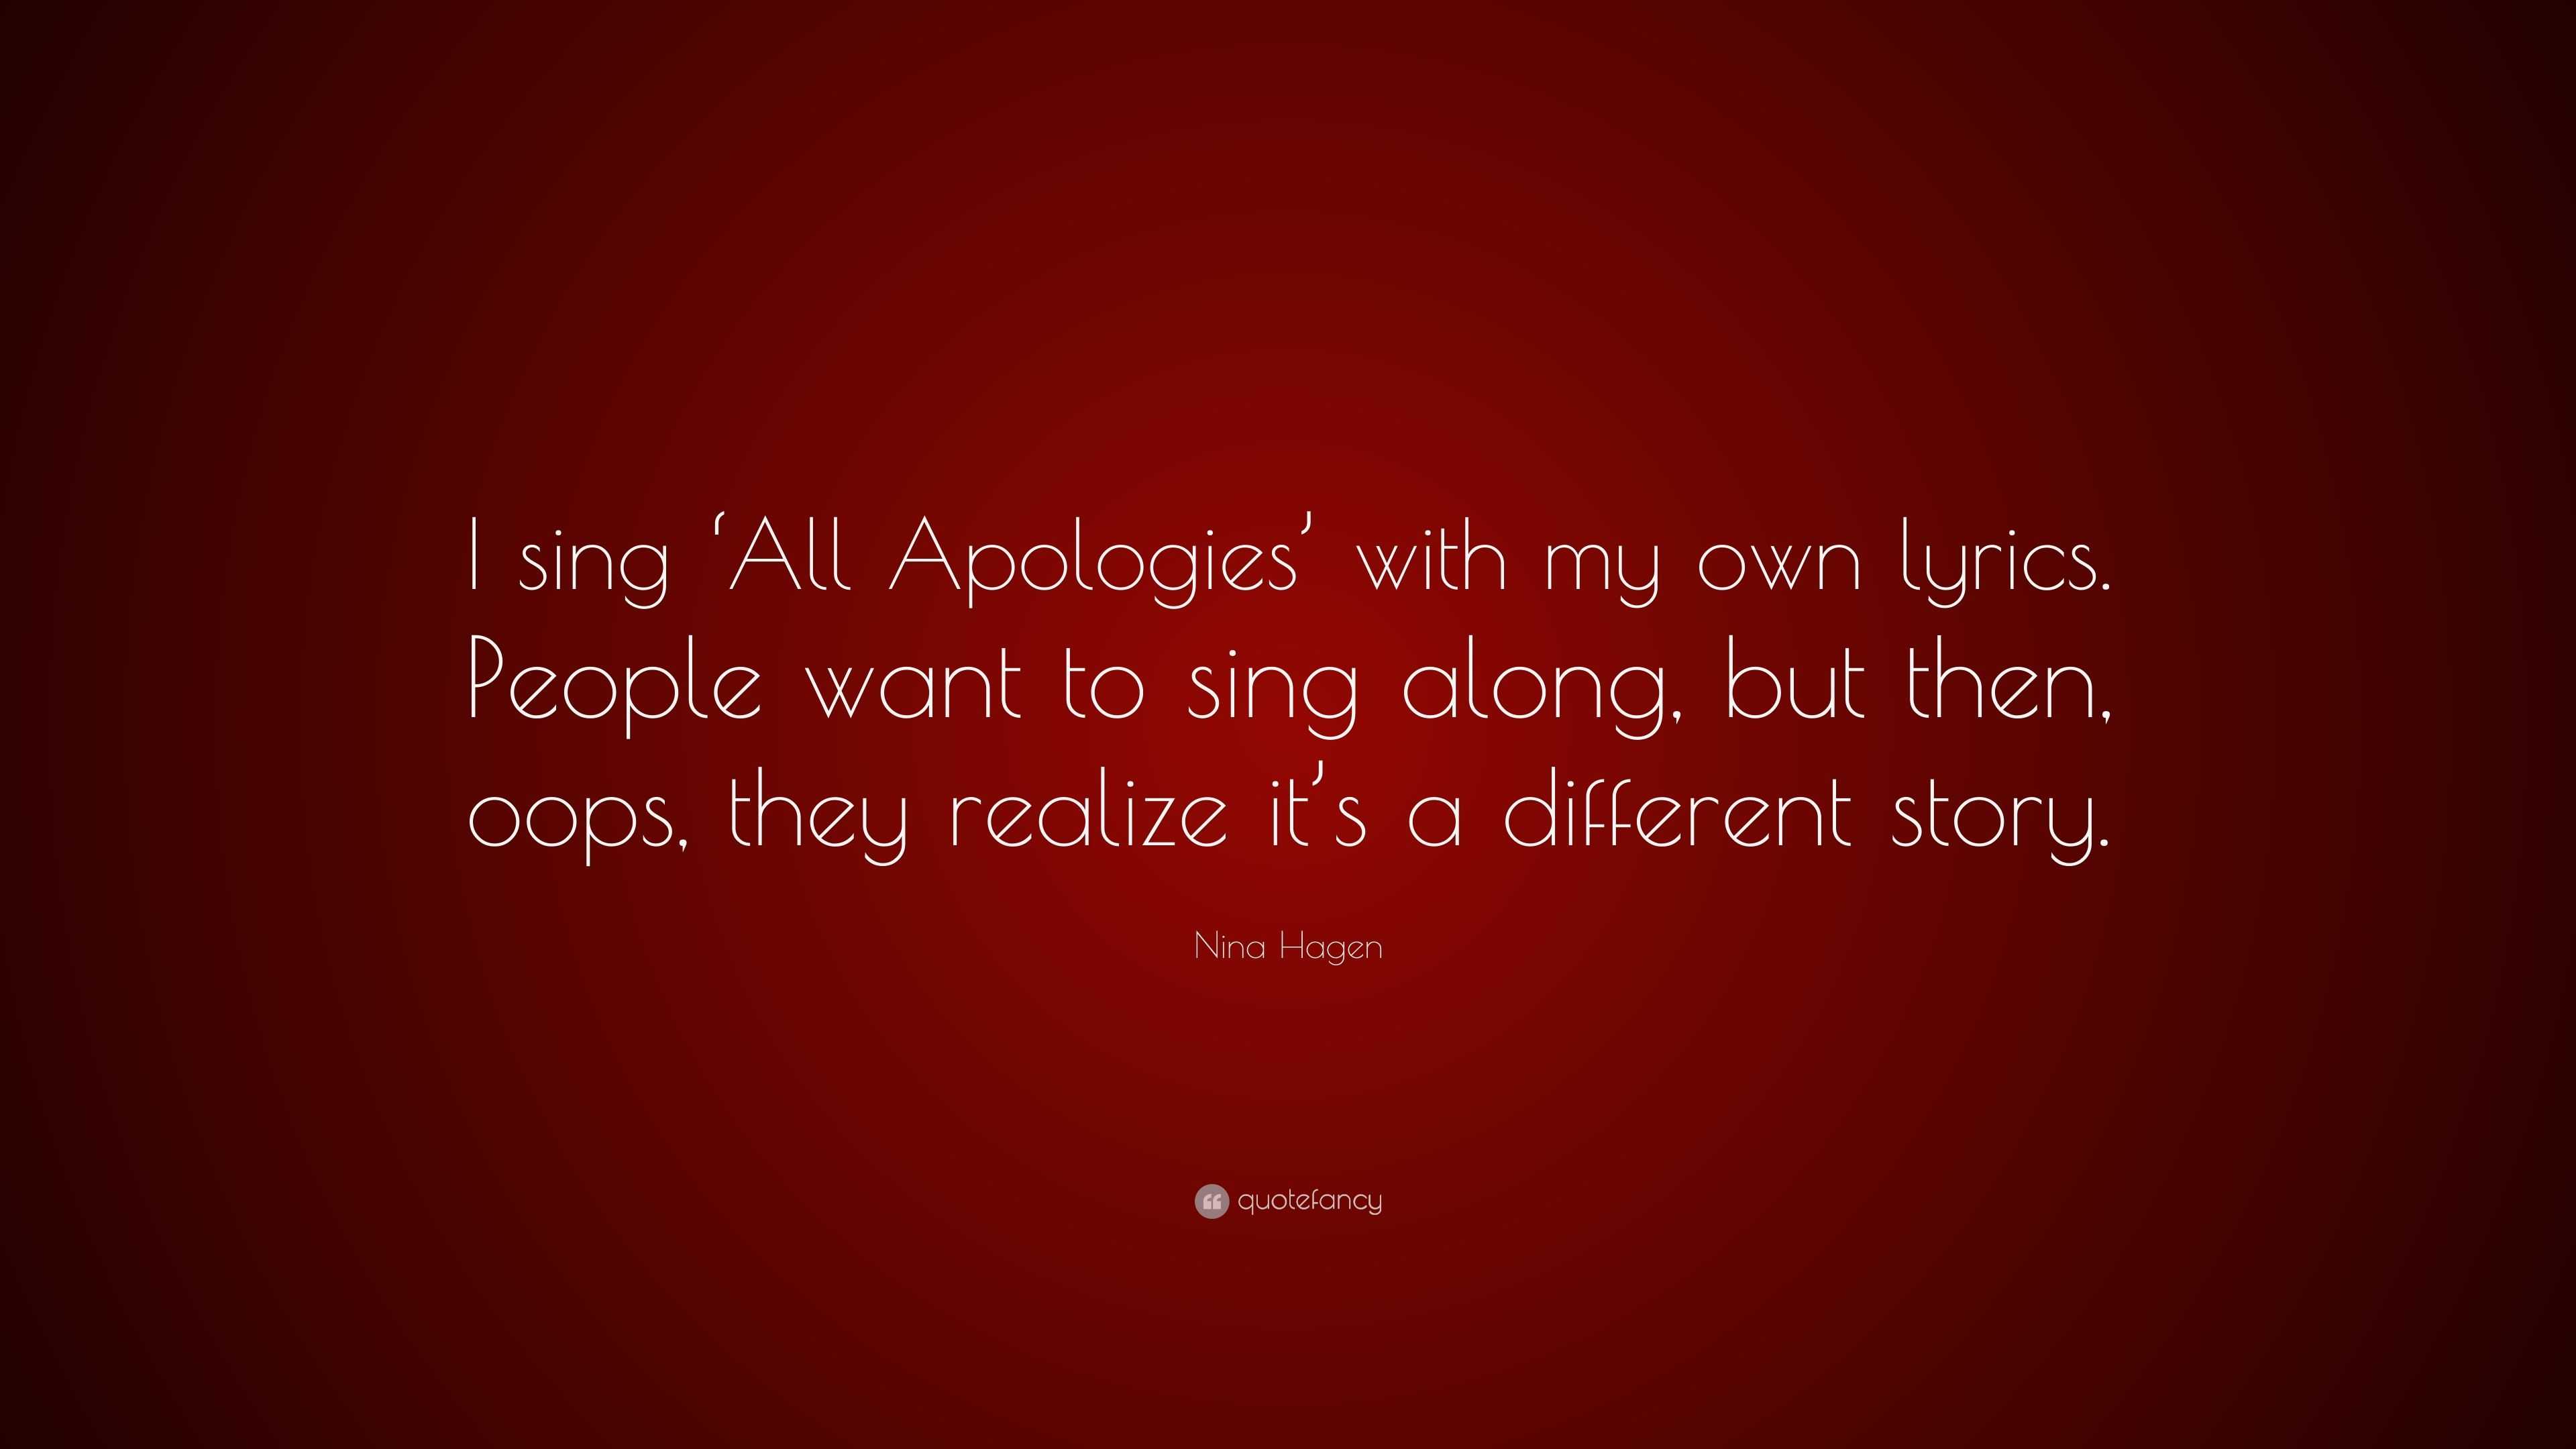 Nina Hagen Quote I Sing All Apologies With My Own Lyrics People Want To Sing Along But Then Oops They Realize It S A Different Stor 7 Wallpapers Quotefancy